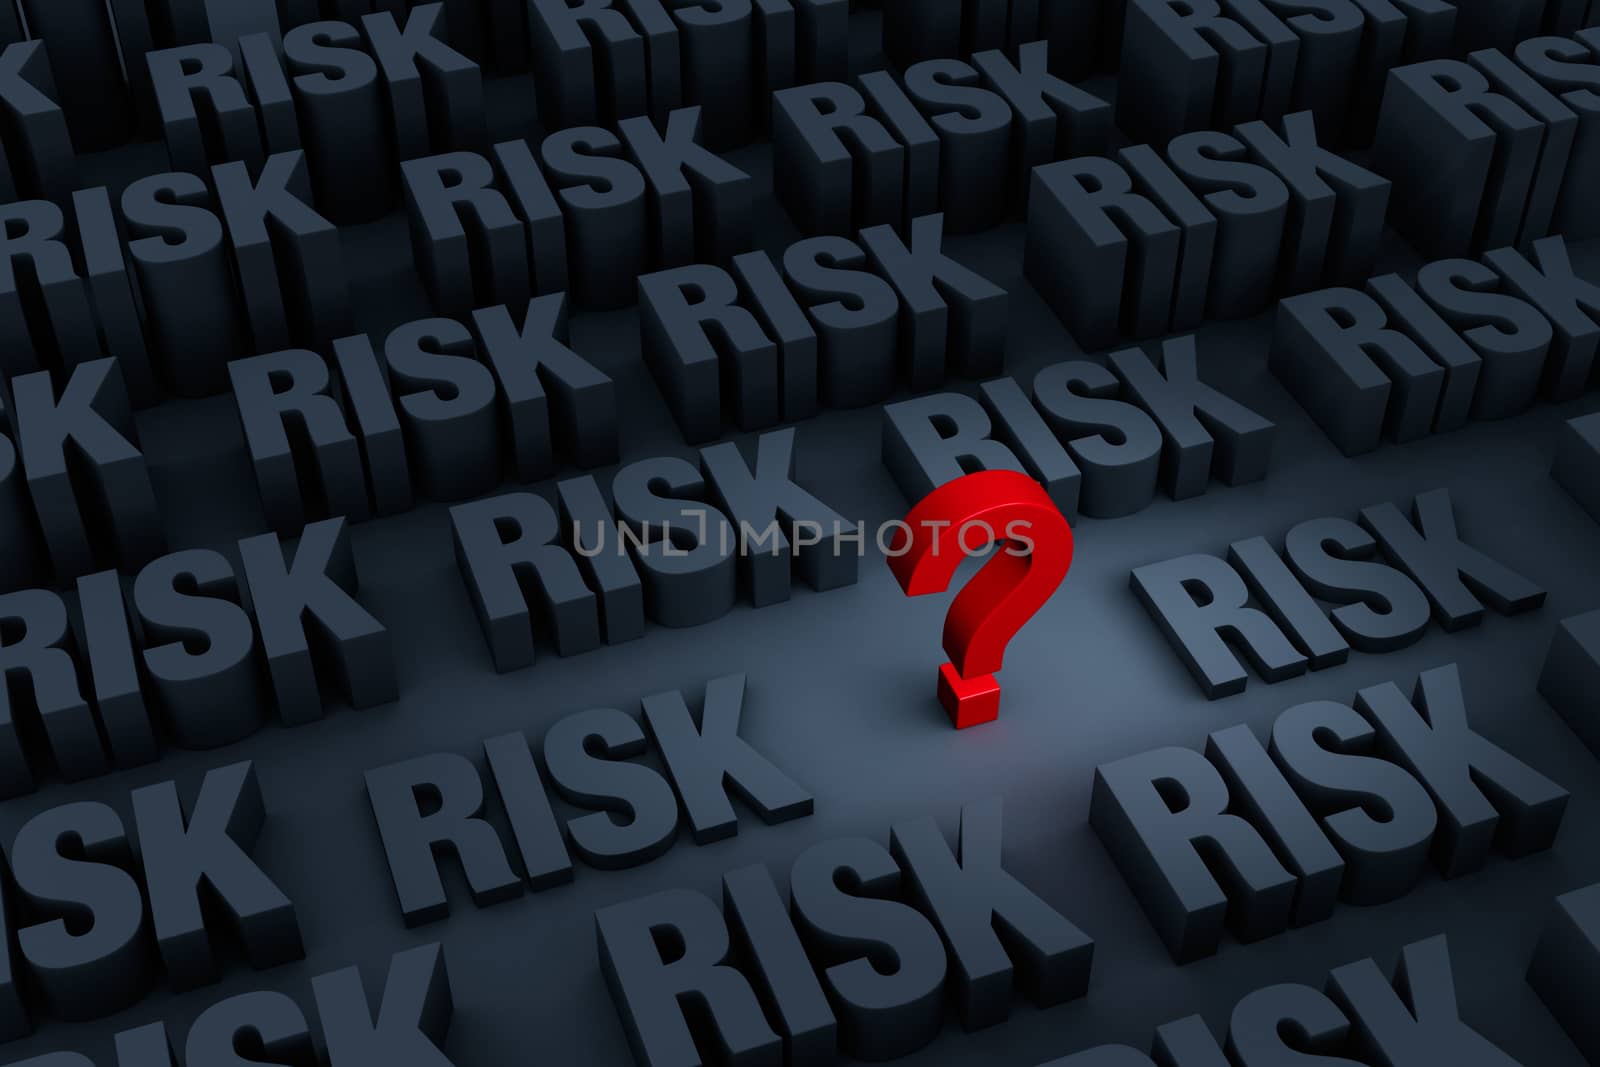 A small red "?" stands out in a dark background of gray "RISK" rising up around it.